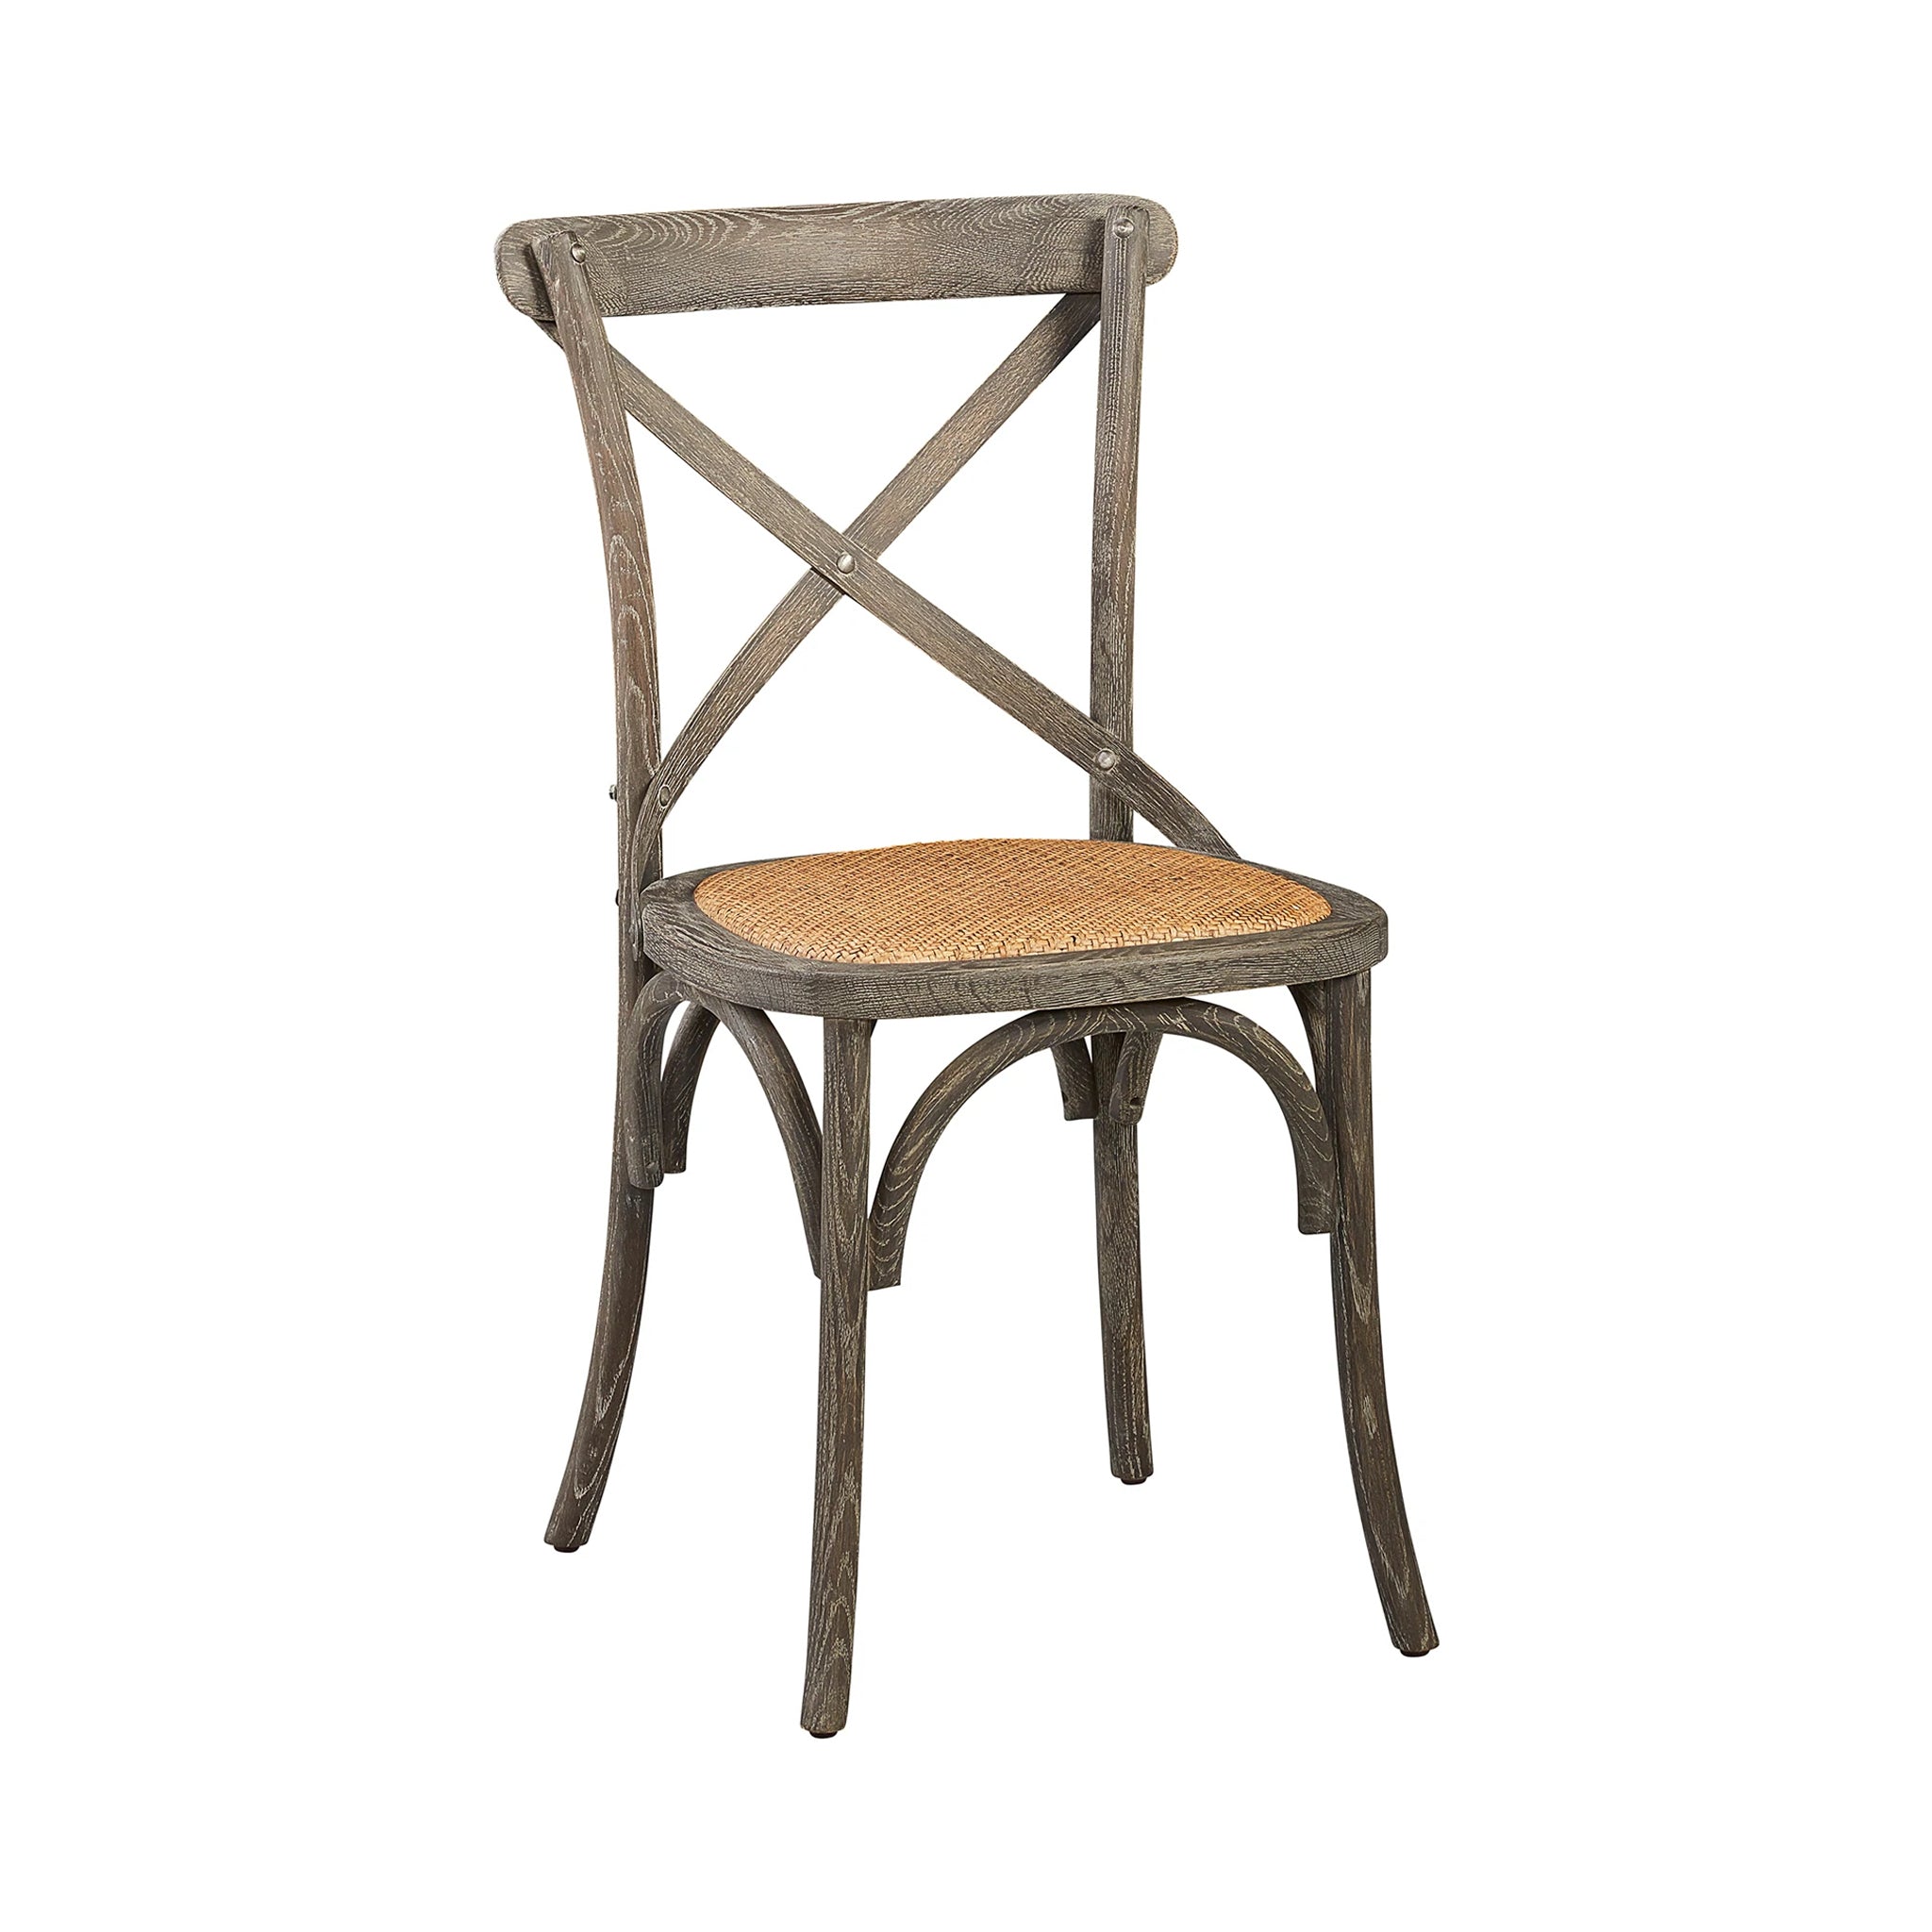 French Cross-Back Dining Chair - Set of 2